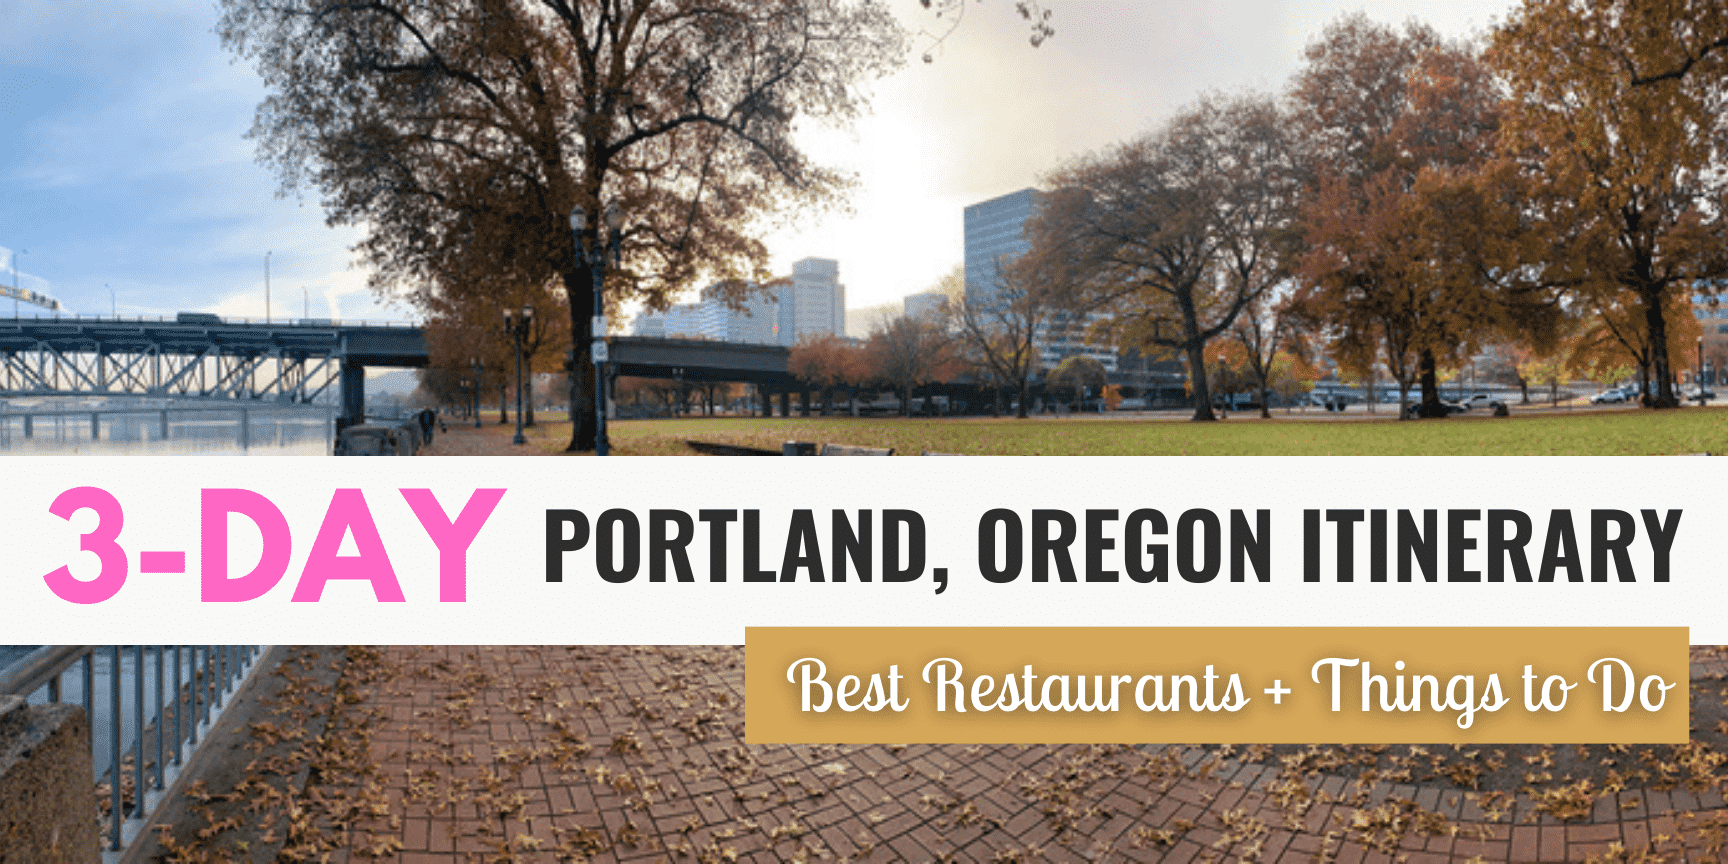 3-Day Portland, Oregon Itinerary. Best Restaurants and Things to Do